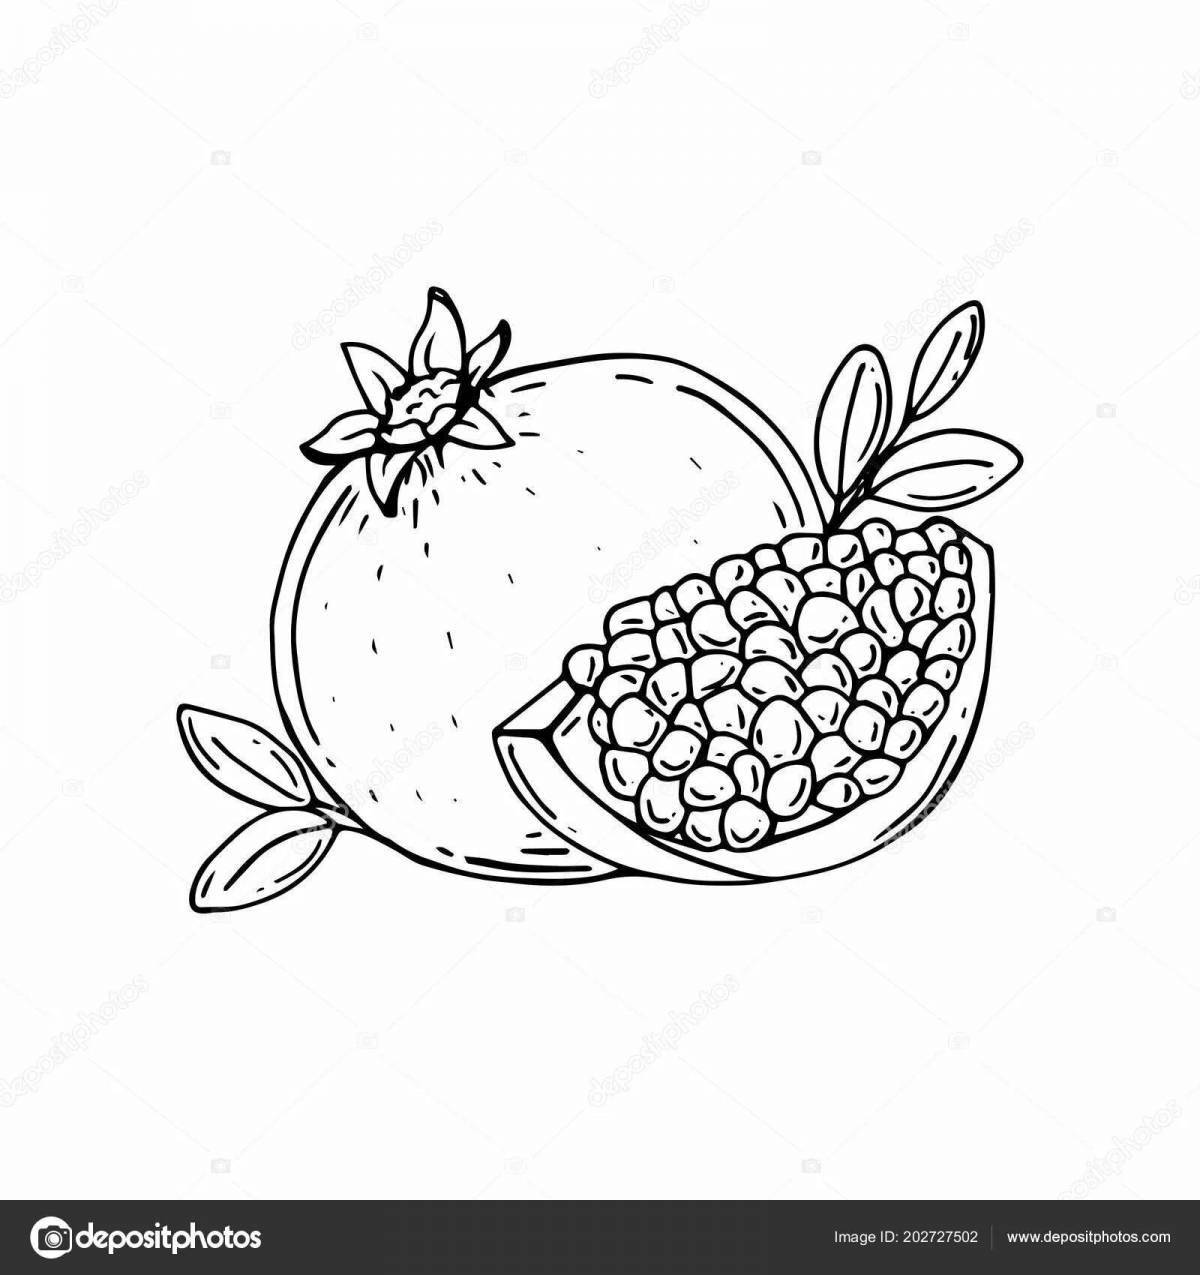 Amazing pomegranate coloring page for kids